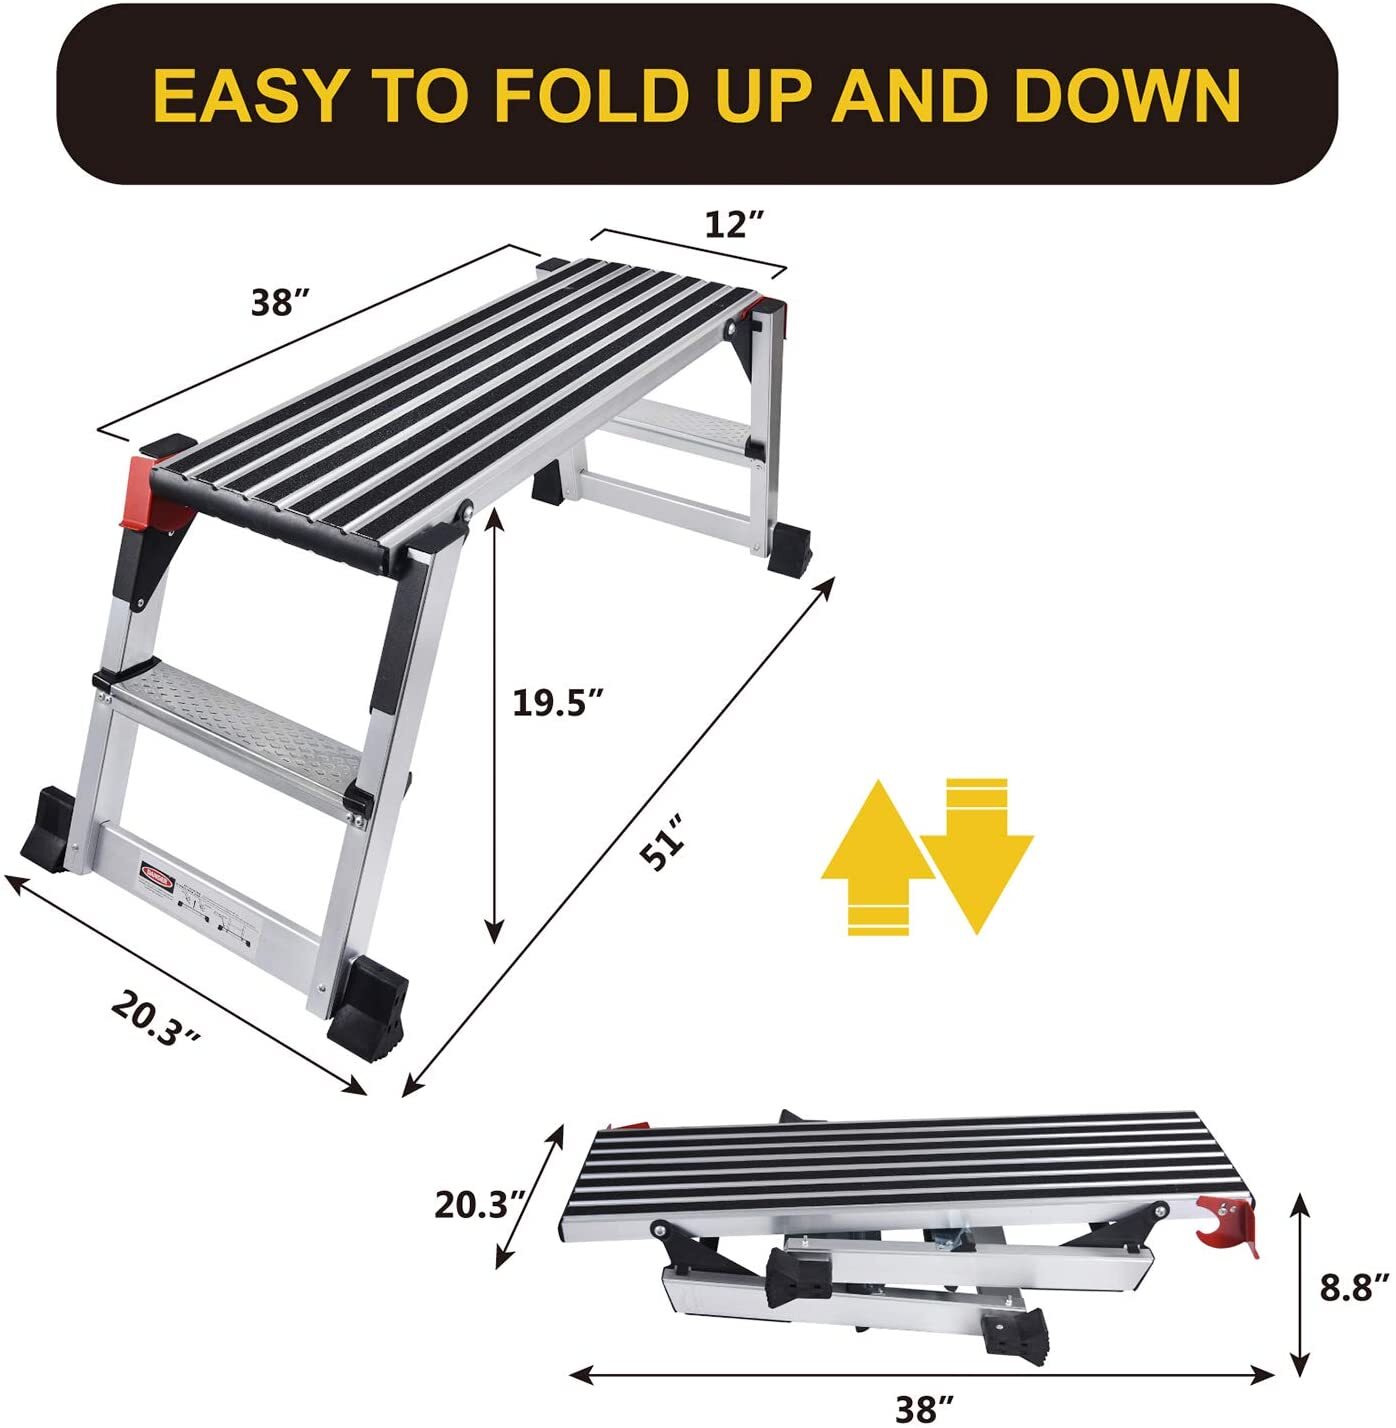 https://images.51microshop.com/5848/product/20220419/Aluminum_Work_Platform_Large_Size_Step_Stool_Folding_Portable_Work_Bench_with_Non_Slip_Mat_Capacity_660_LBS_Heavy_Duty_1650344390181_1.jpg